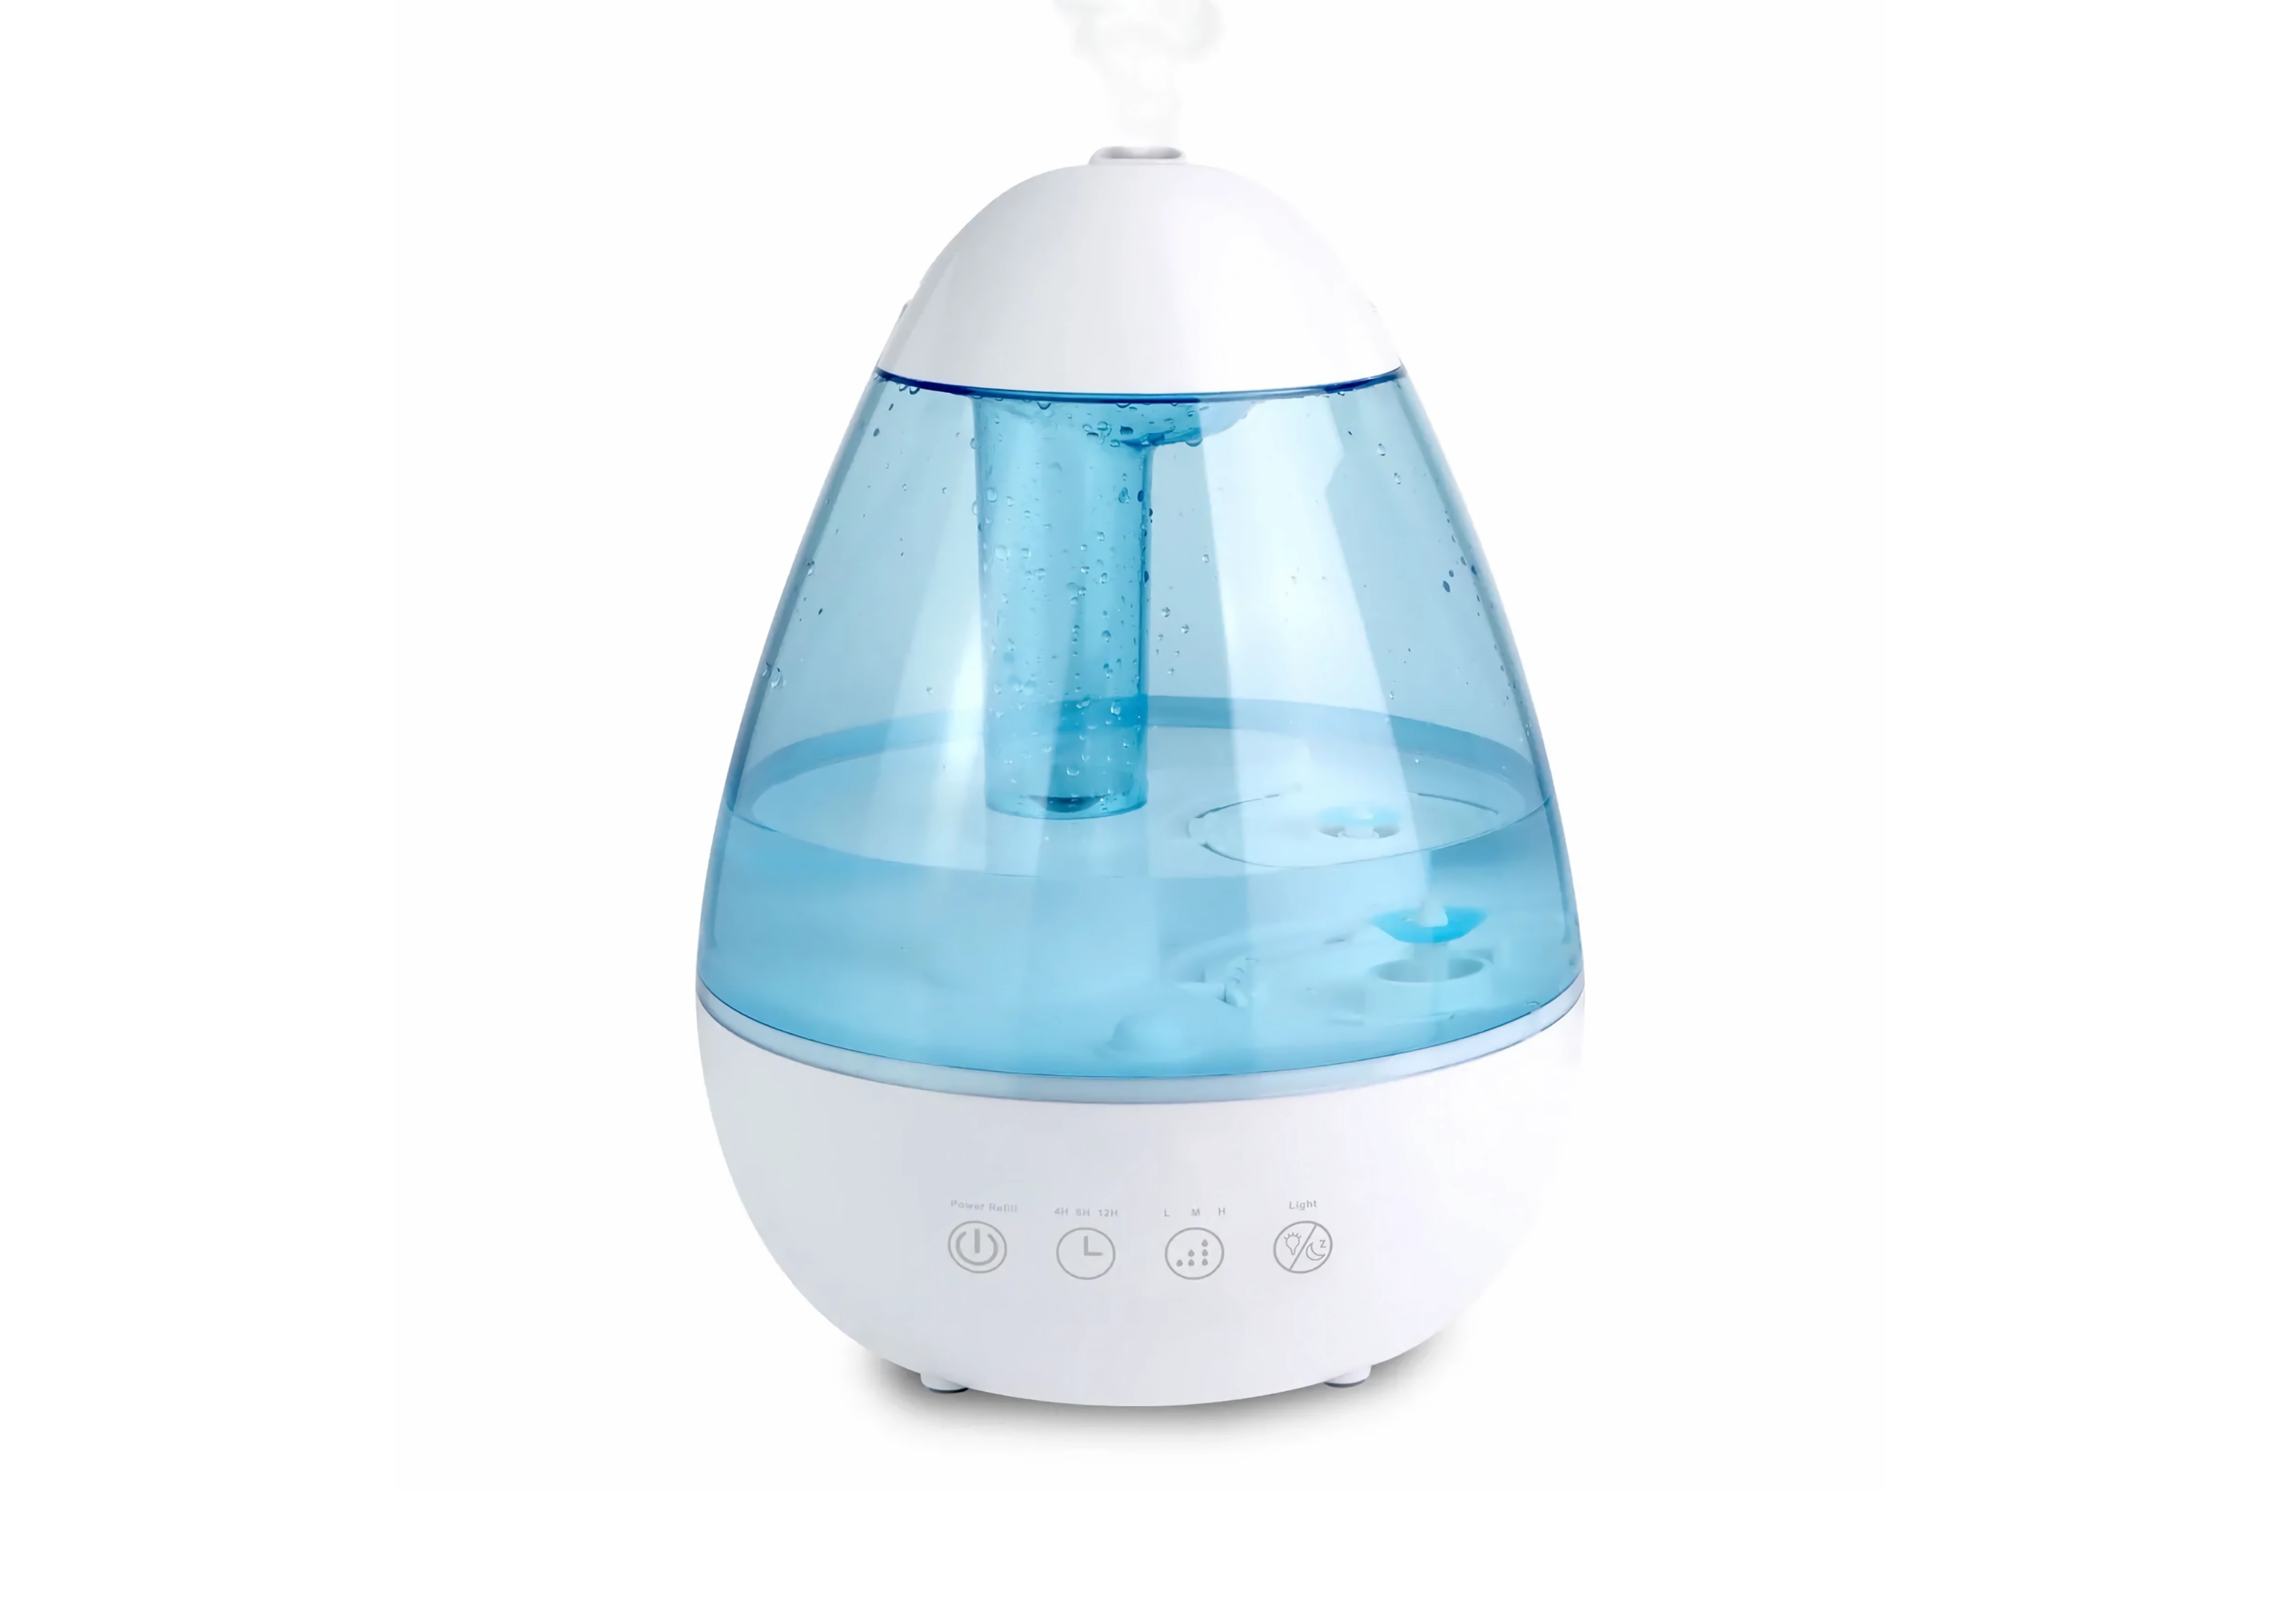 Goofoo Entry-level Blue Cool Mist Air Humidifier 2.2L